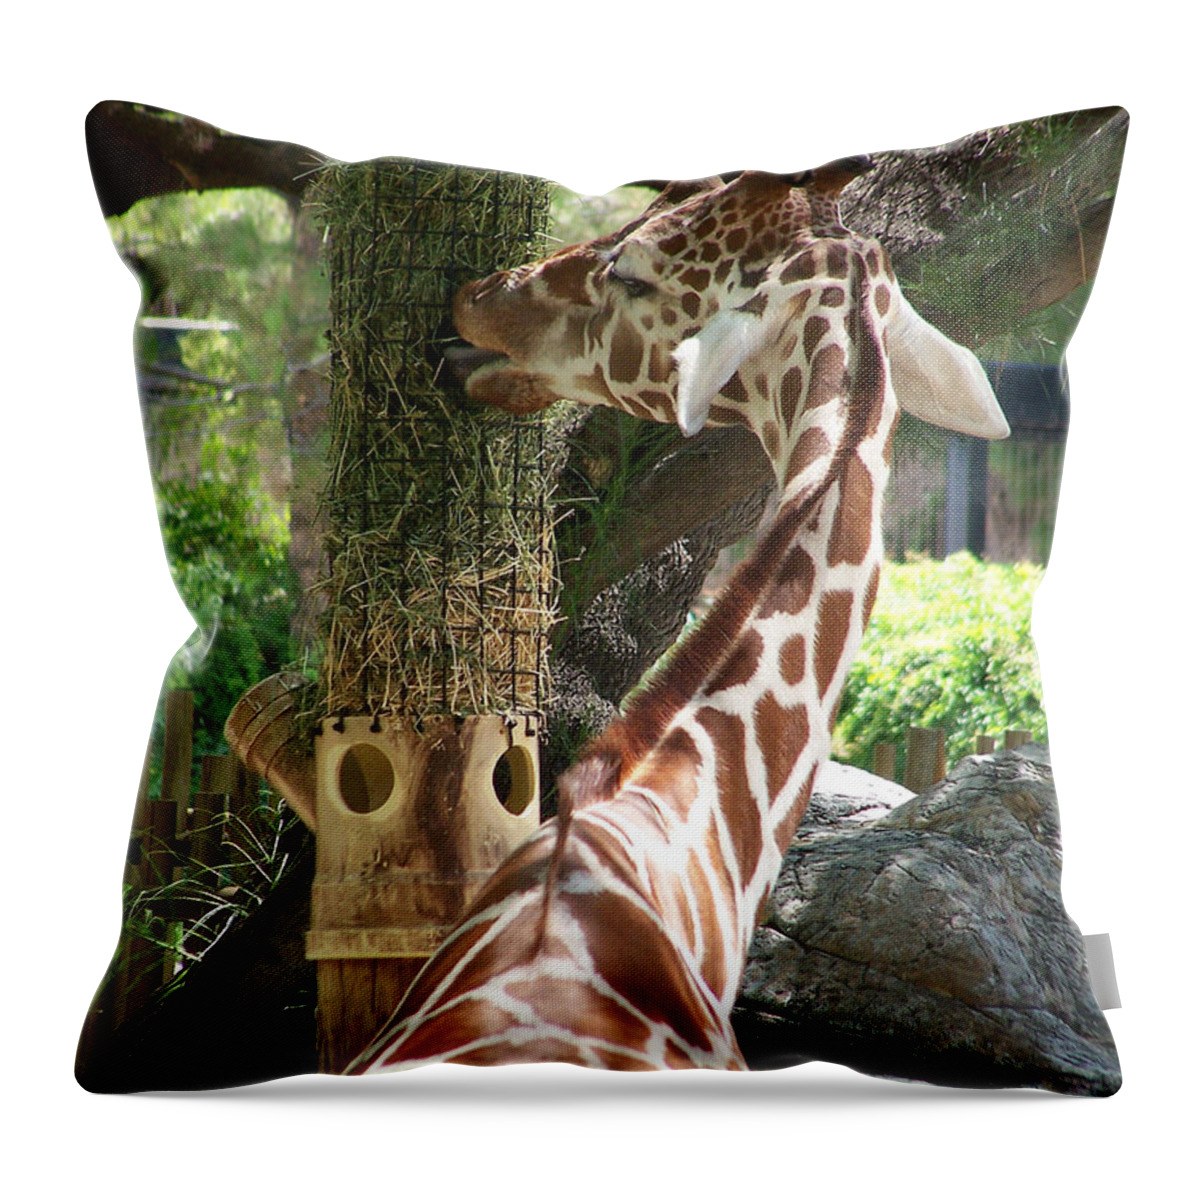 Animal Prints Throw Pillow featuring the photograph Zara 1 by Jewels Hamrick